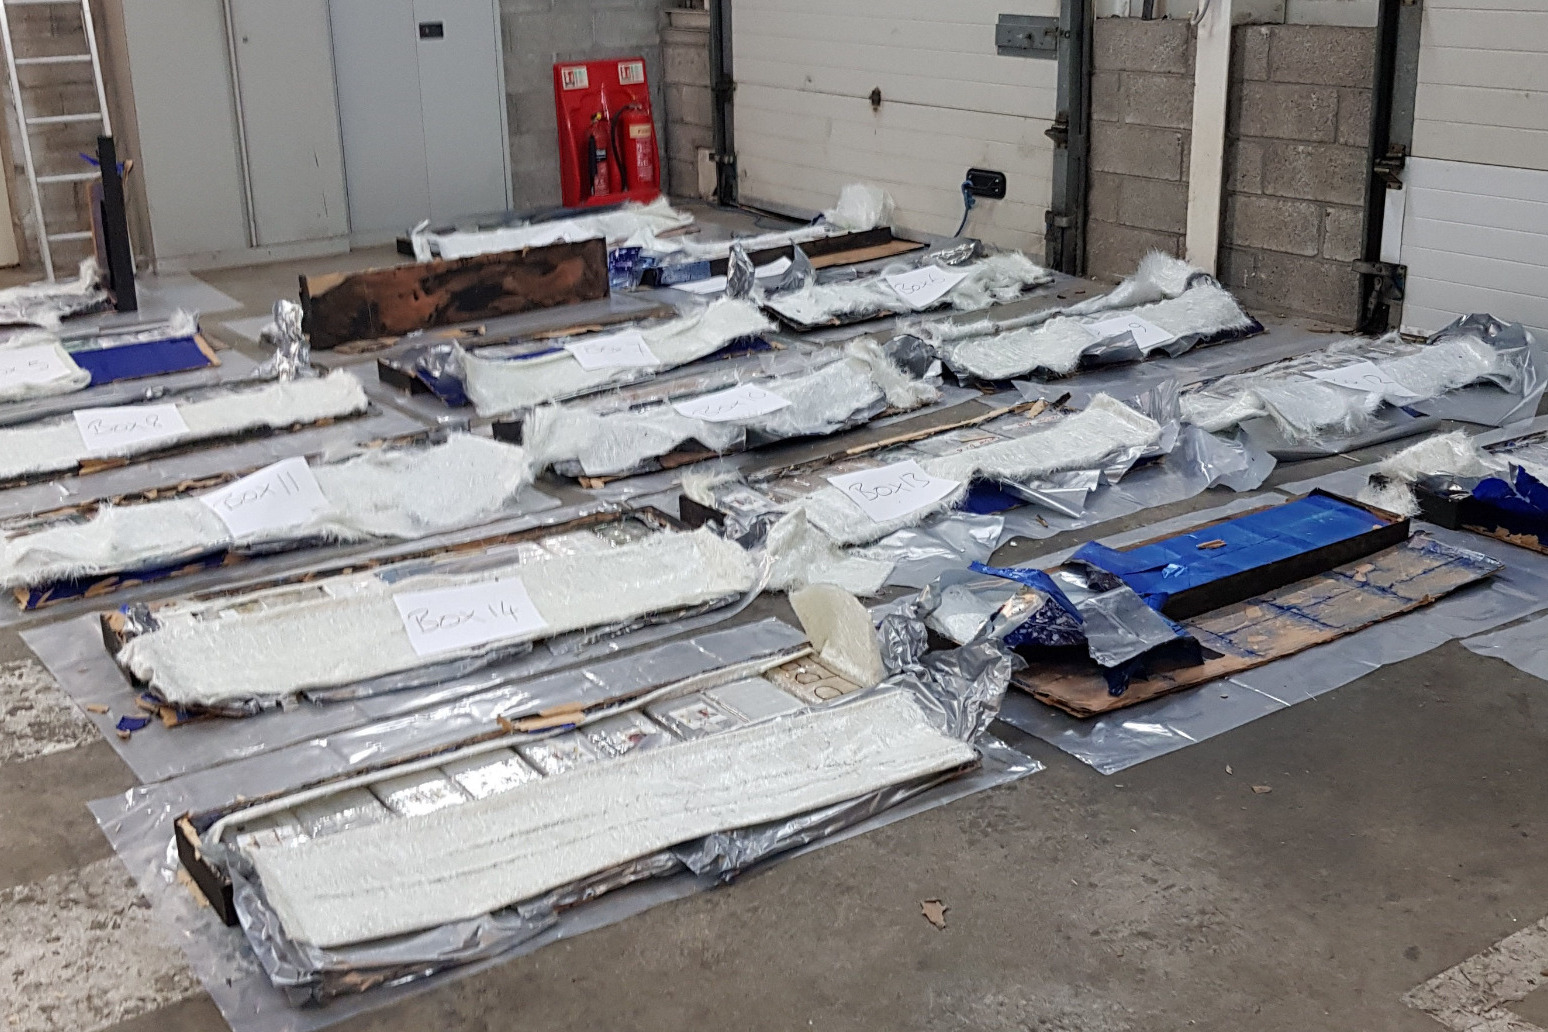 Border Force officers seize 260 kilos of cocaine from lorry 